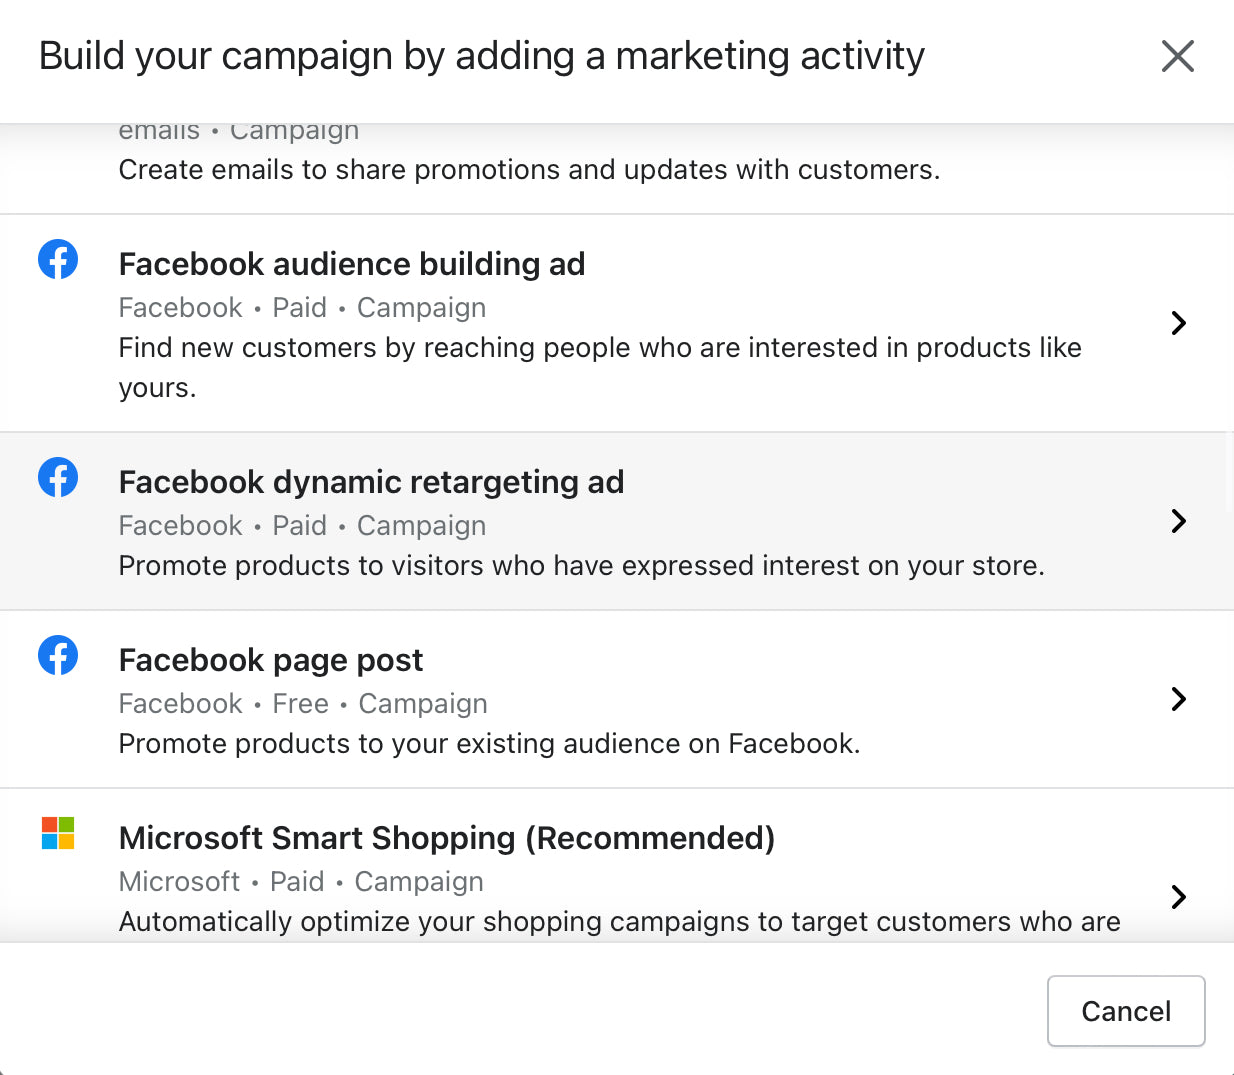 steps to build your Facebook retargeting campaign in Shopify